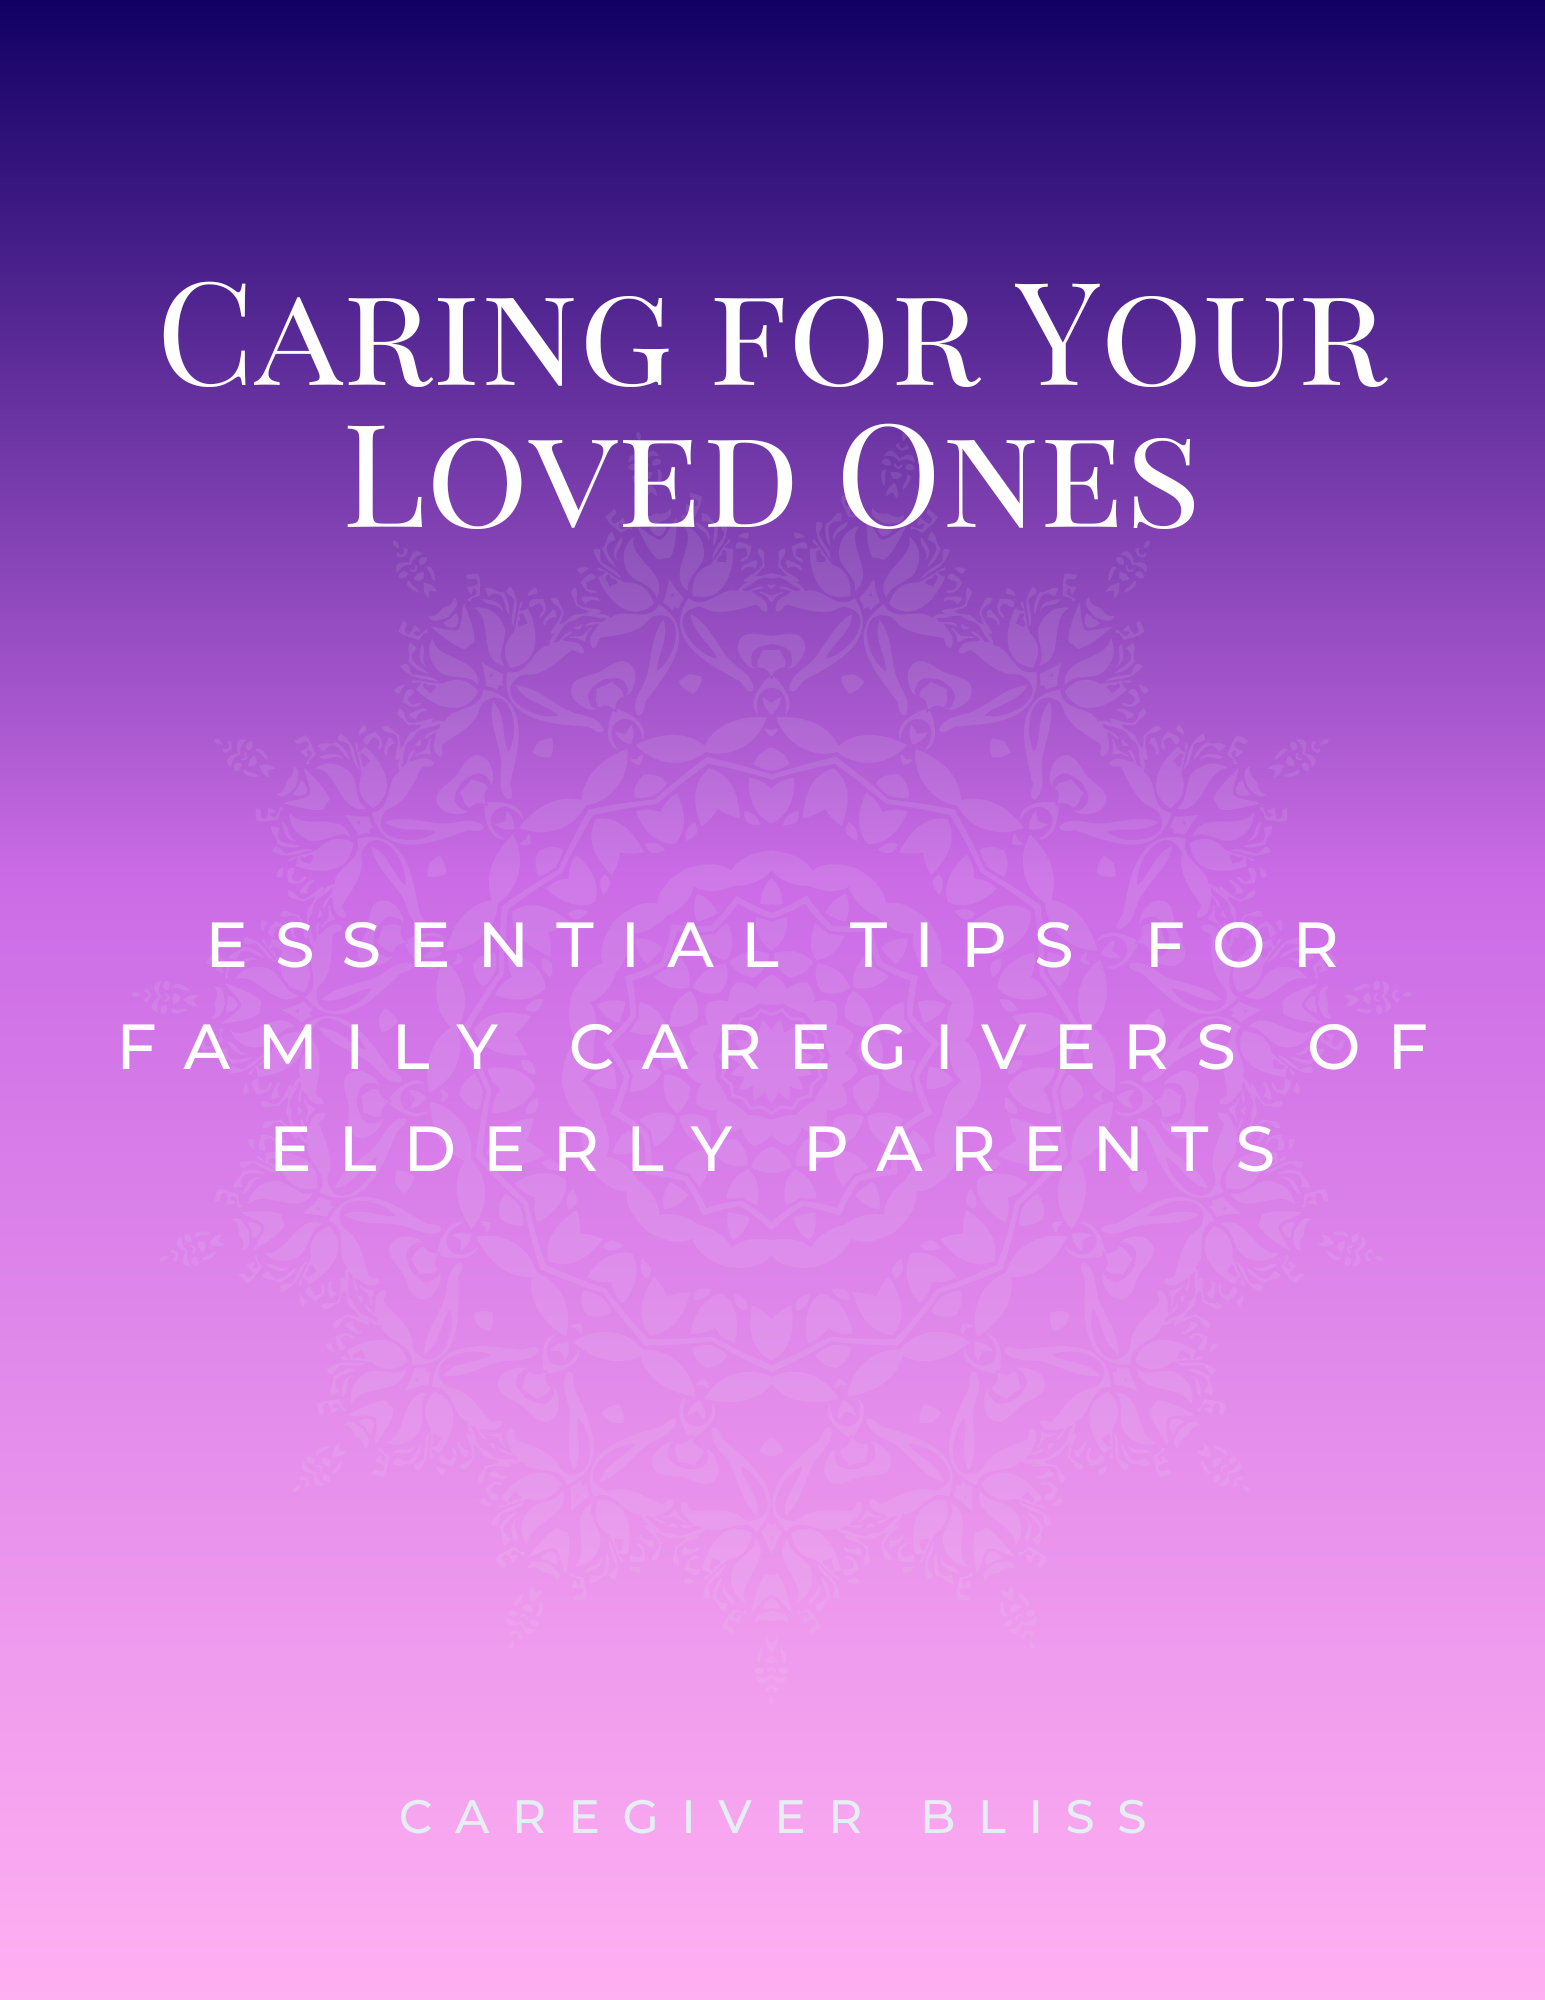 Caring for Your Loved Ones: Essential Tips for Family Caregivers of Elderly Parents